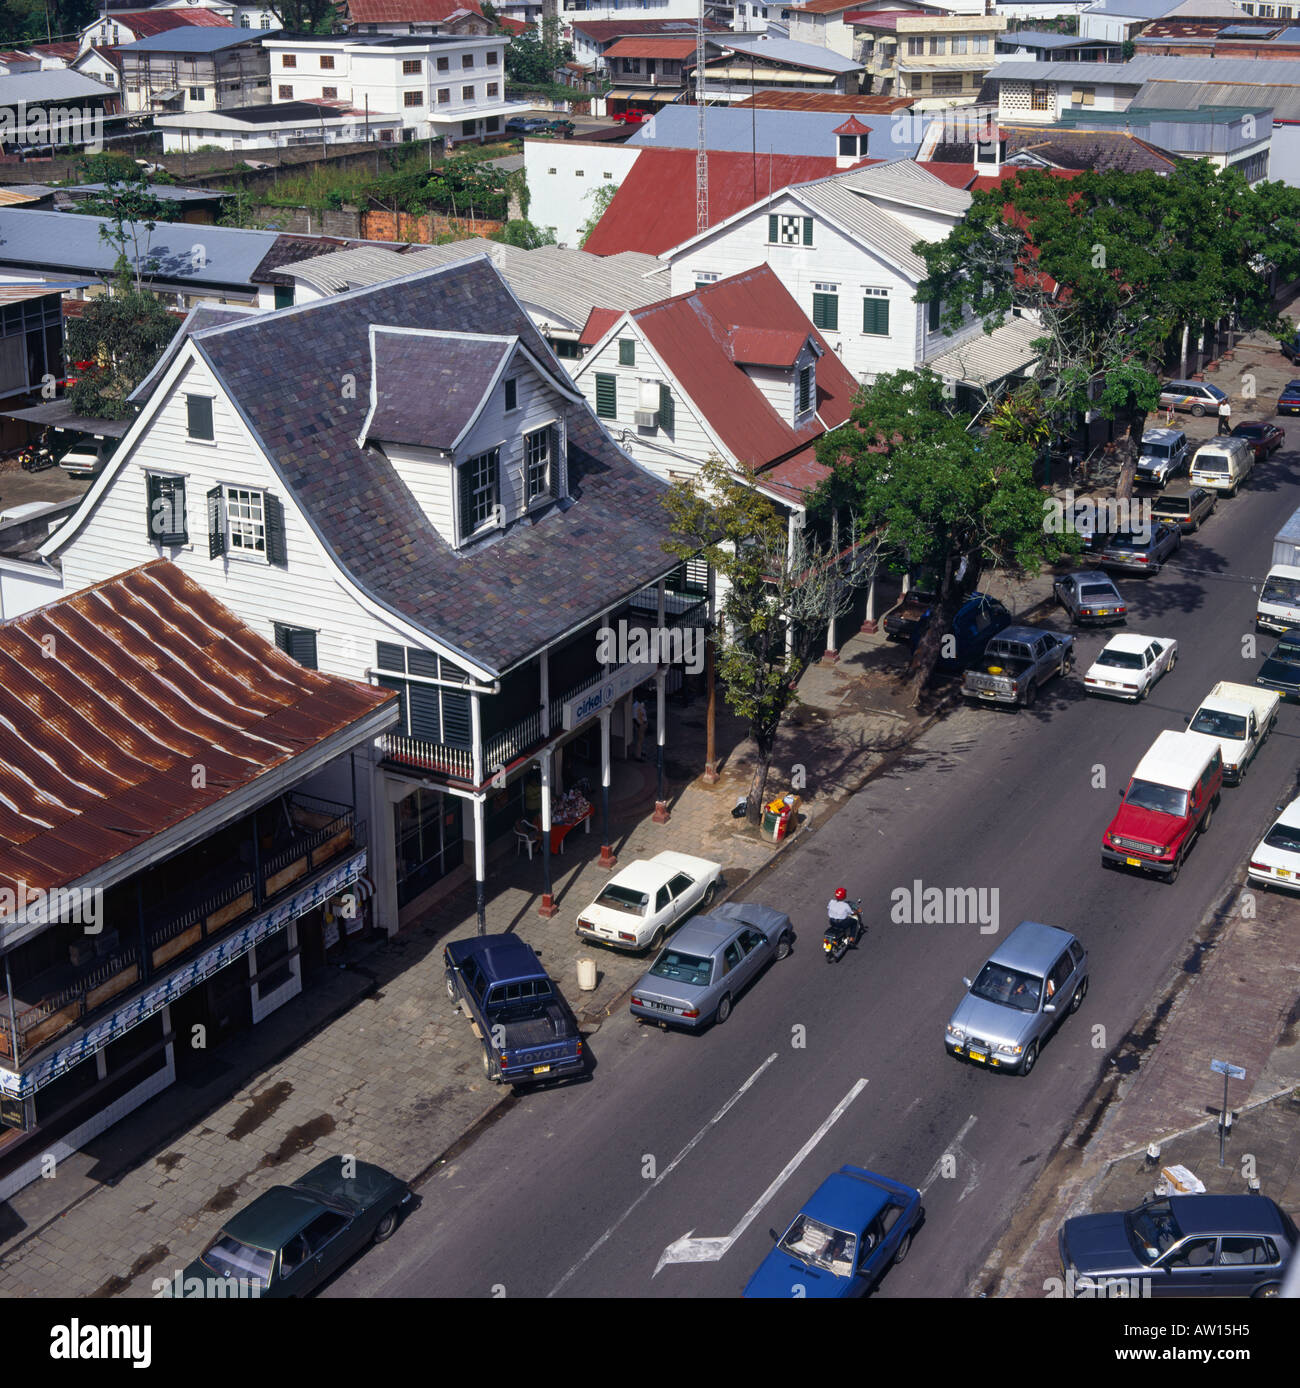 A street view of Dominee Straat with traditional style wood and colonial buildings in Paramaribo Suriname South America Stock Photo